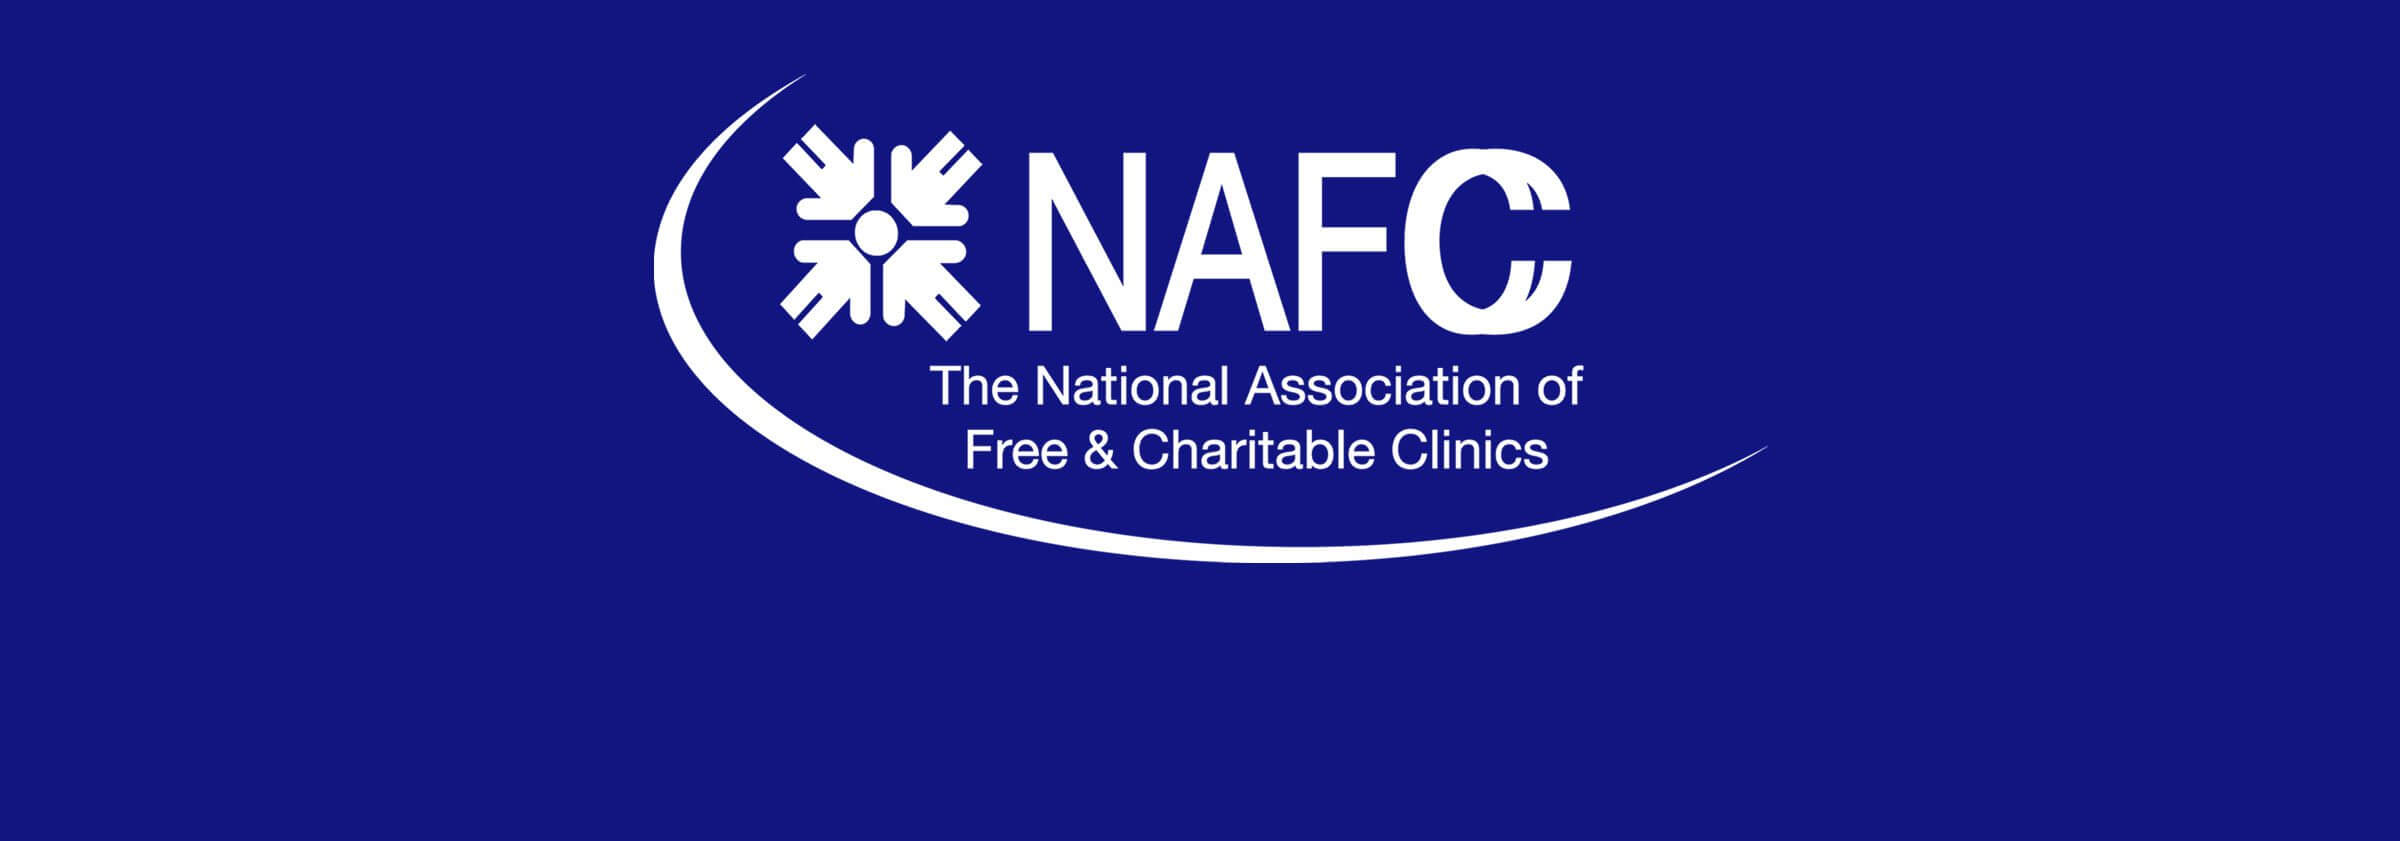 NAFC Response to Affordable Care Act Announcements